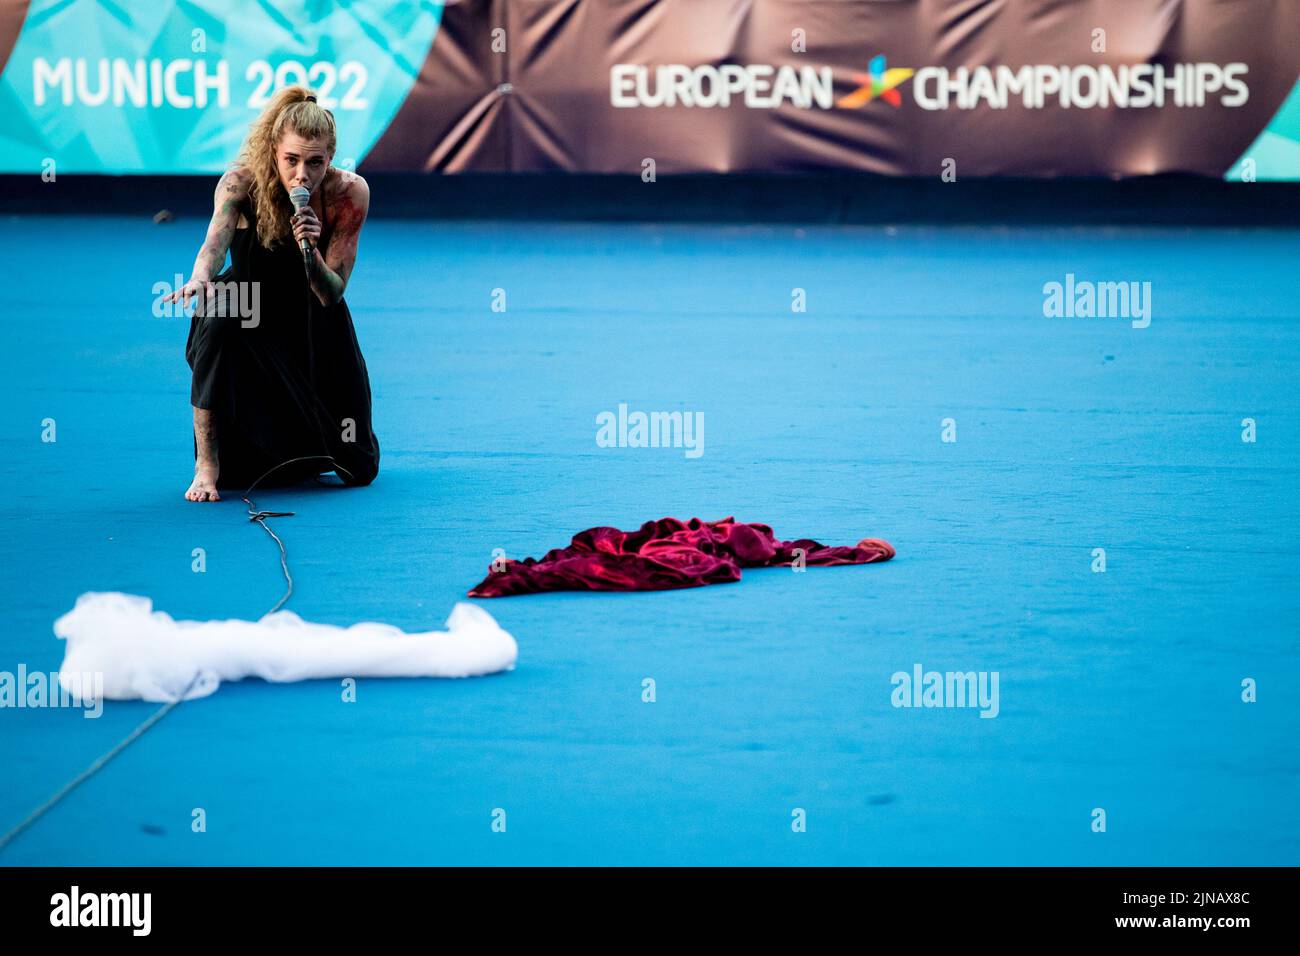 Munich, Germany. 10th Aug, 2022. Munich, August 10th 2022: A female performer during the opening ceremony at the Munich 2022 European Championships in Munich, Germany (Liam Asman/SPP) Credit: SPP Sport Press Photo. /Alamy Live News Stock Photo